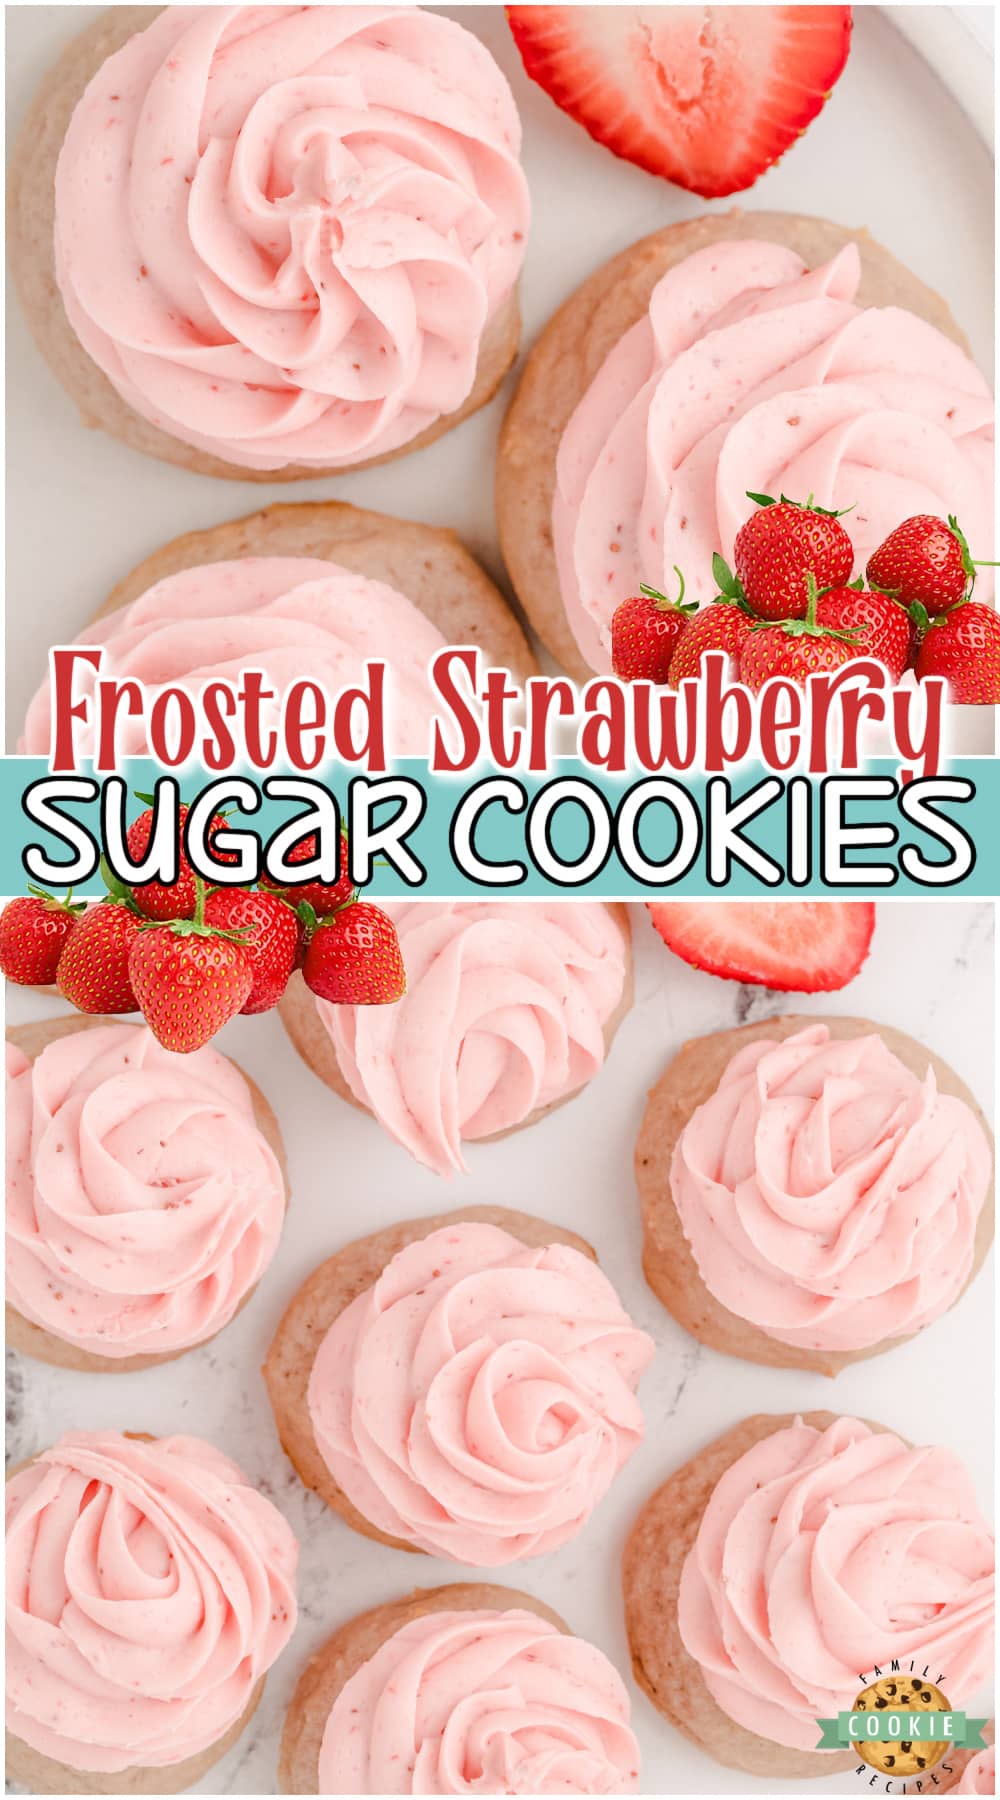 Frosted Strawberry Cookies made with fresh strawberry for that bright, fresh flavor that everyone adores! Soft, pillowy sugar cookies topped with a luscious strawberry buttercream you just have to try! 